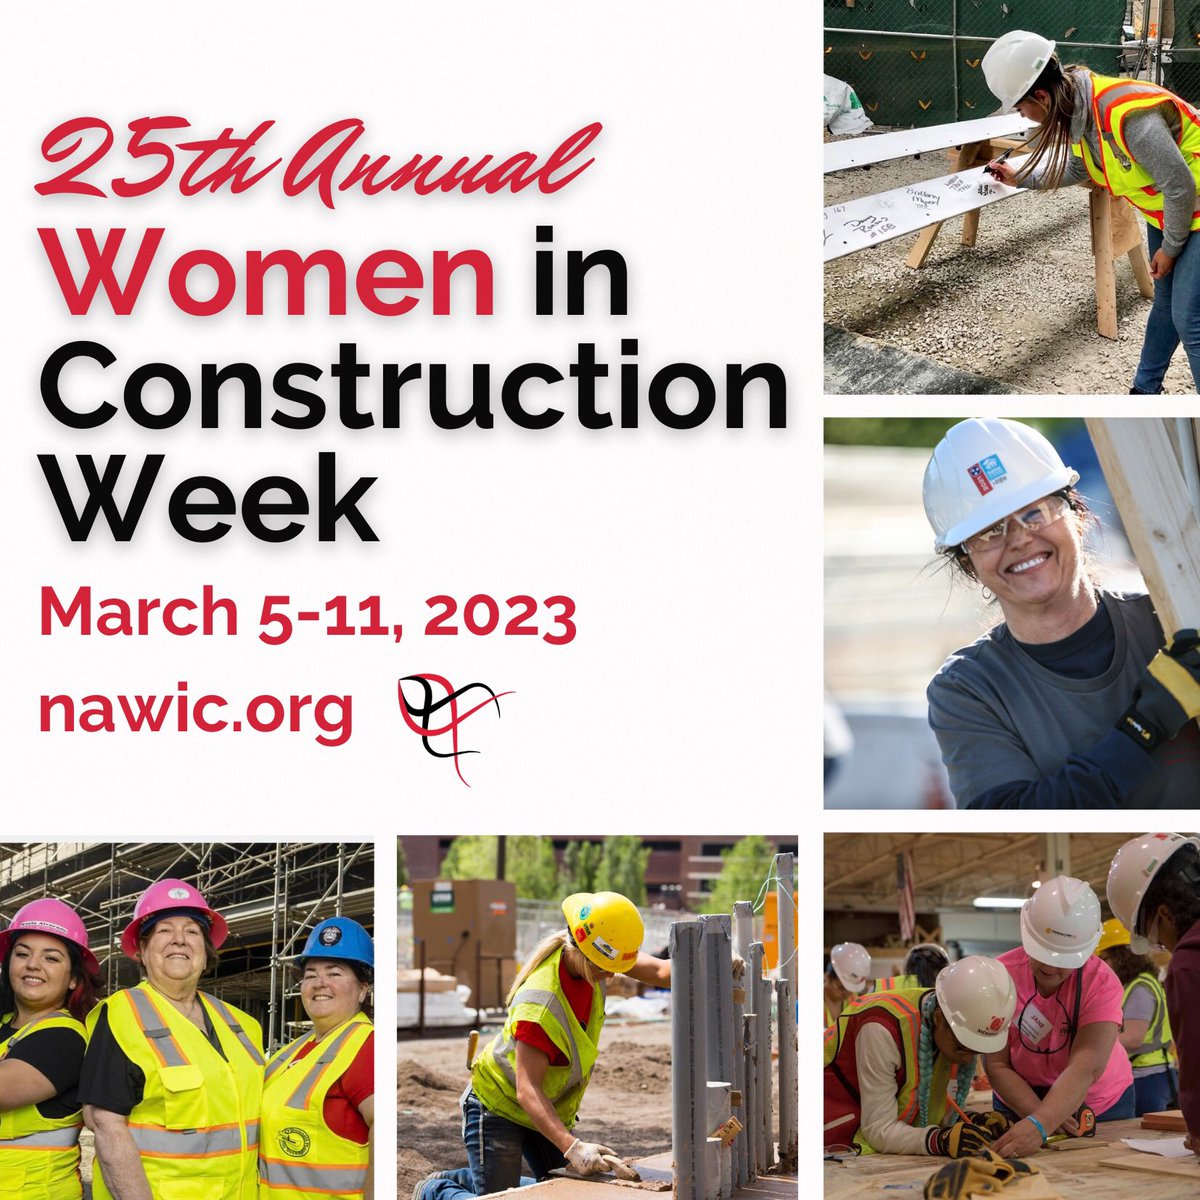 If you want to see the Women In Construction Week BIG PICTURE, click on these hashtags
#wicweek23 #manypathsonemission #wicweek #25yearsofwicweek #IWD #womeninconstruction #womenintrades #wicweek2023 #NAWIC
Then get involved with @nawicnational & a local chapter